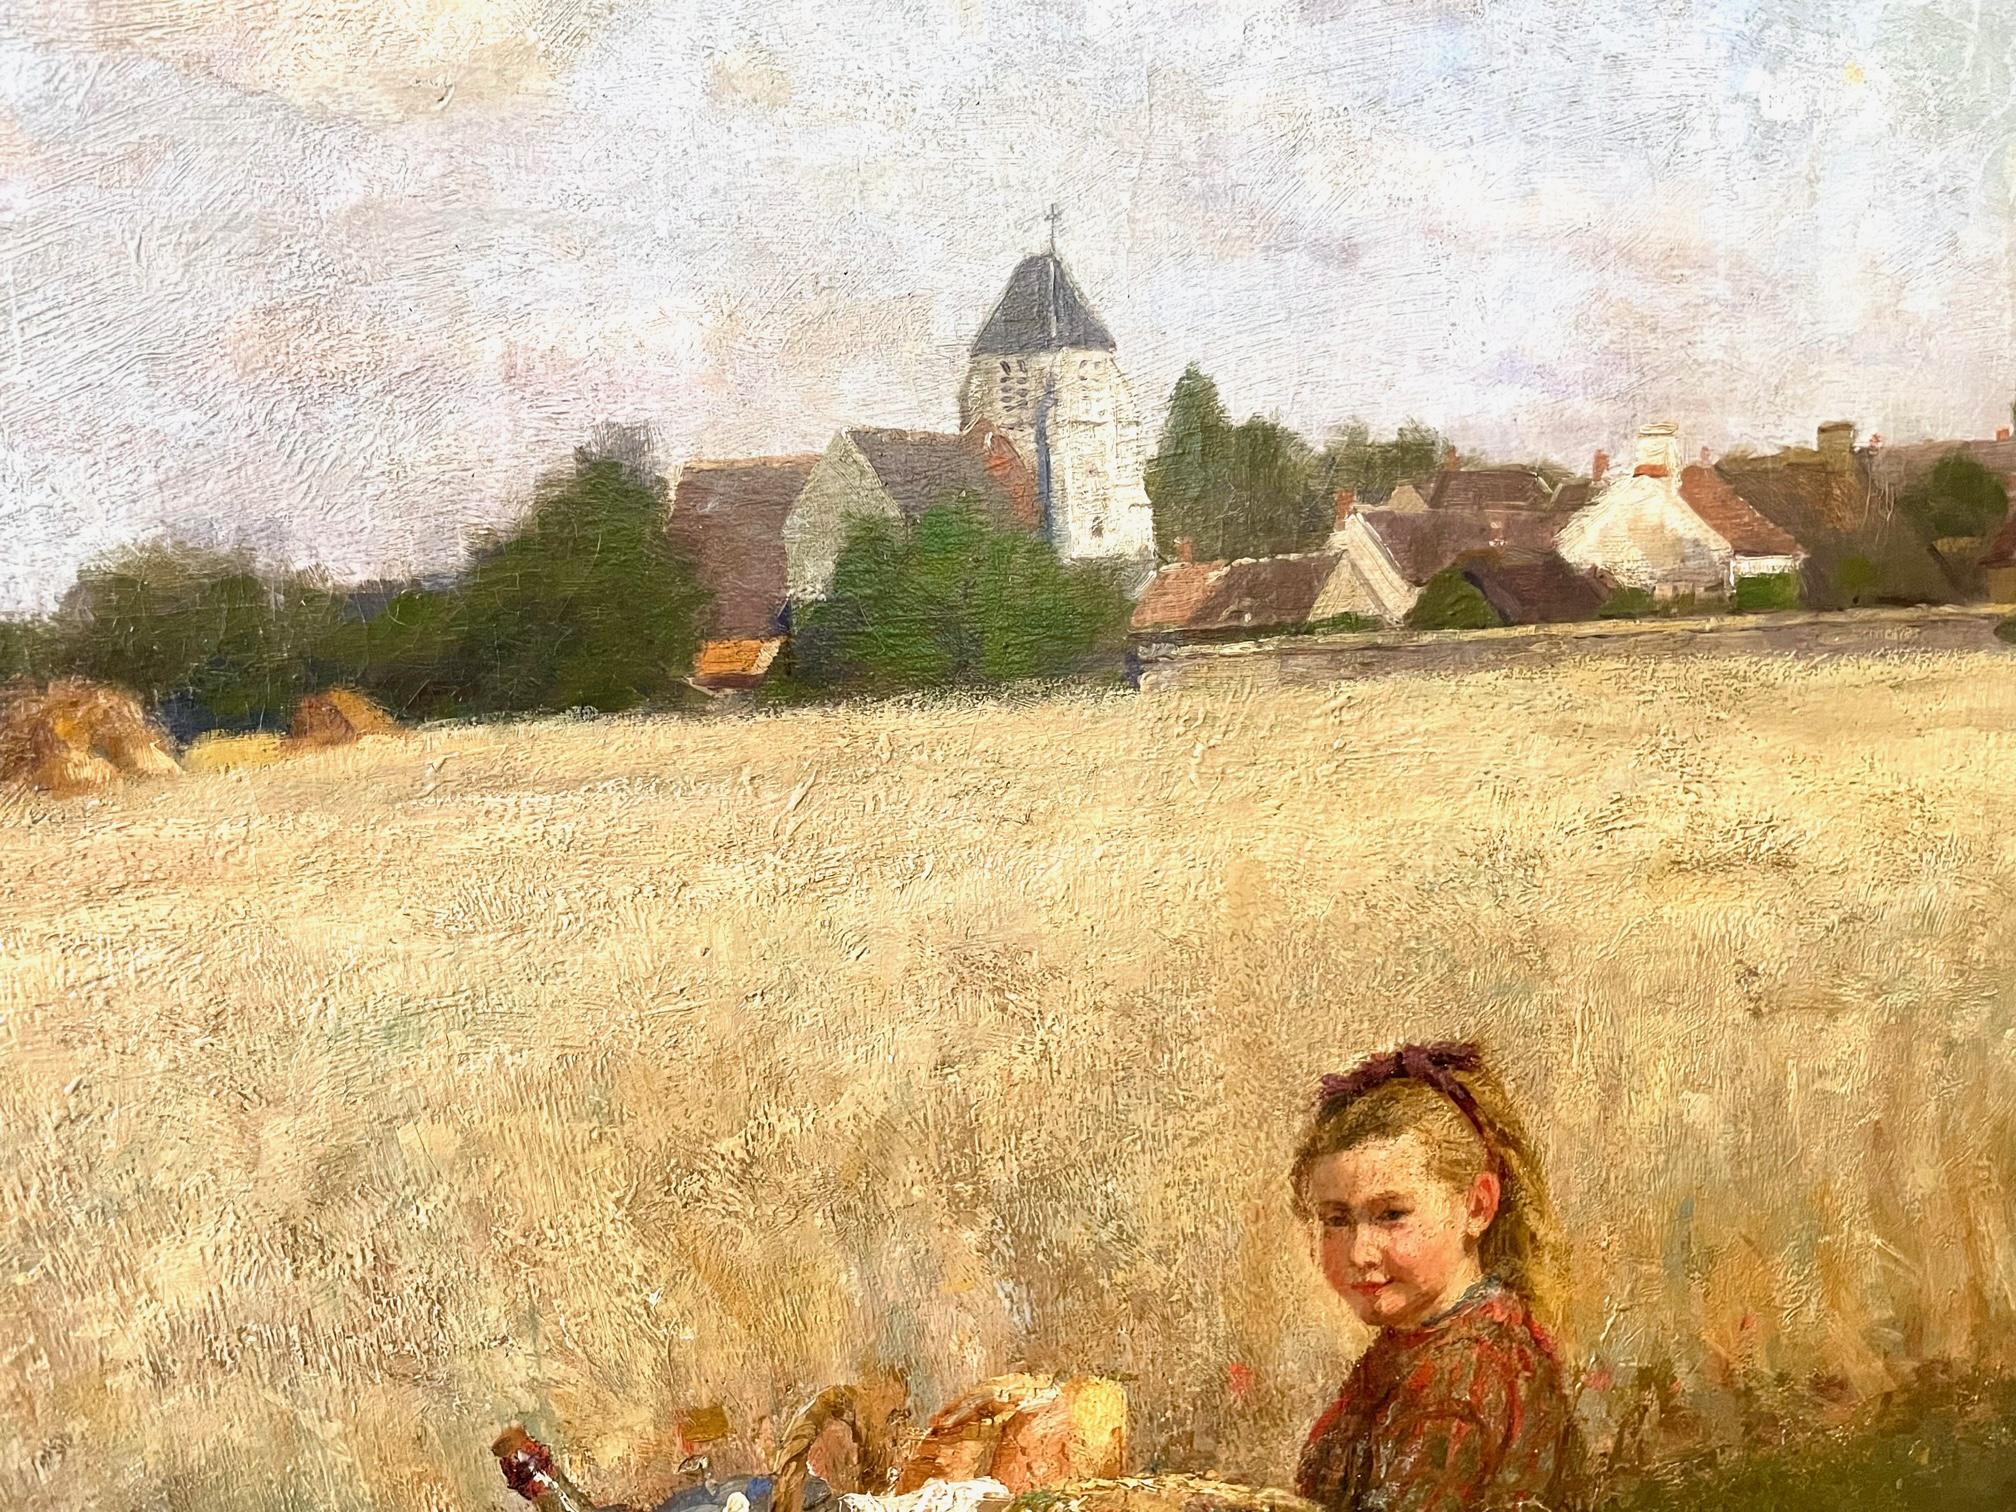 Picnic in the Fields 4